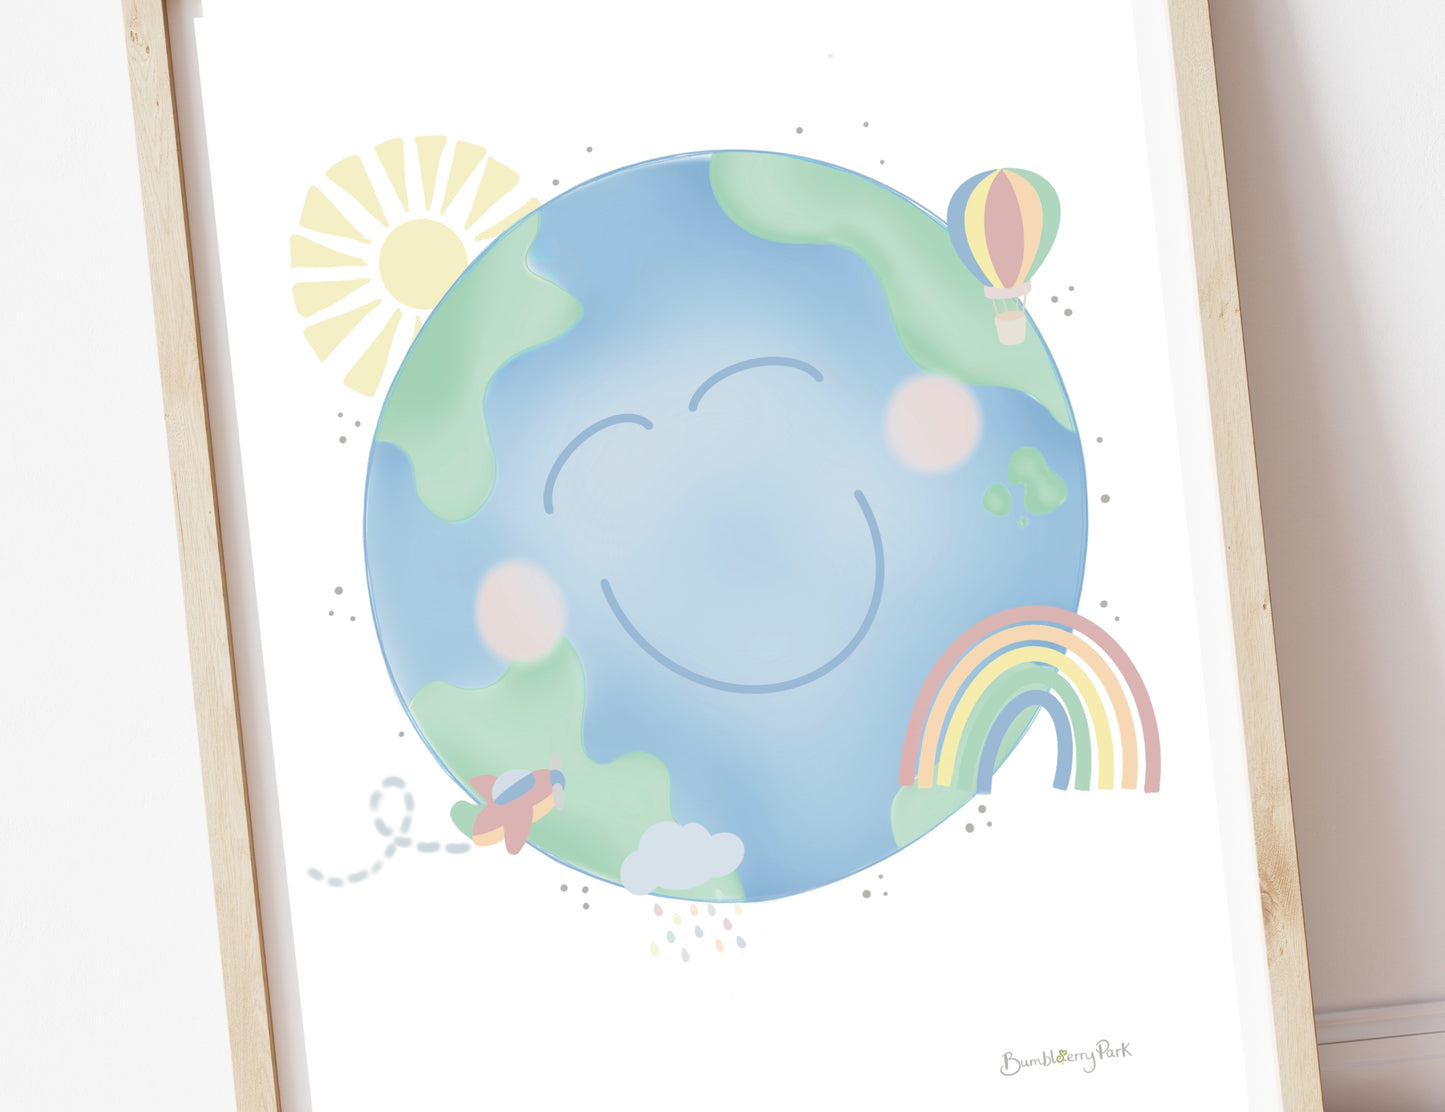 close up of a earth illustration with a smiling face and weather and travel illustrations